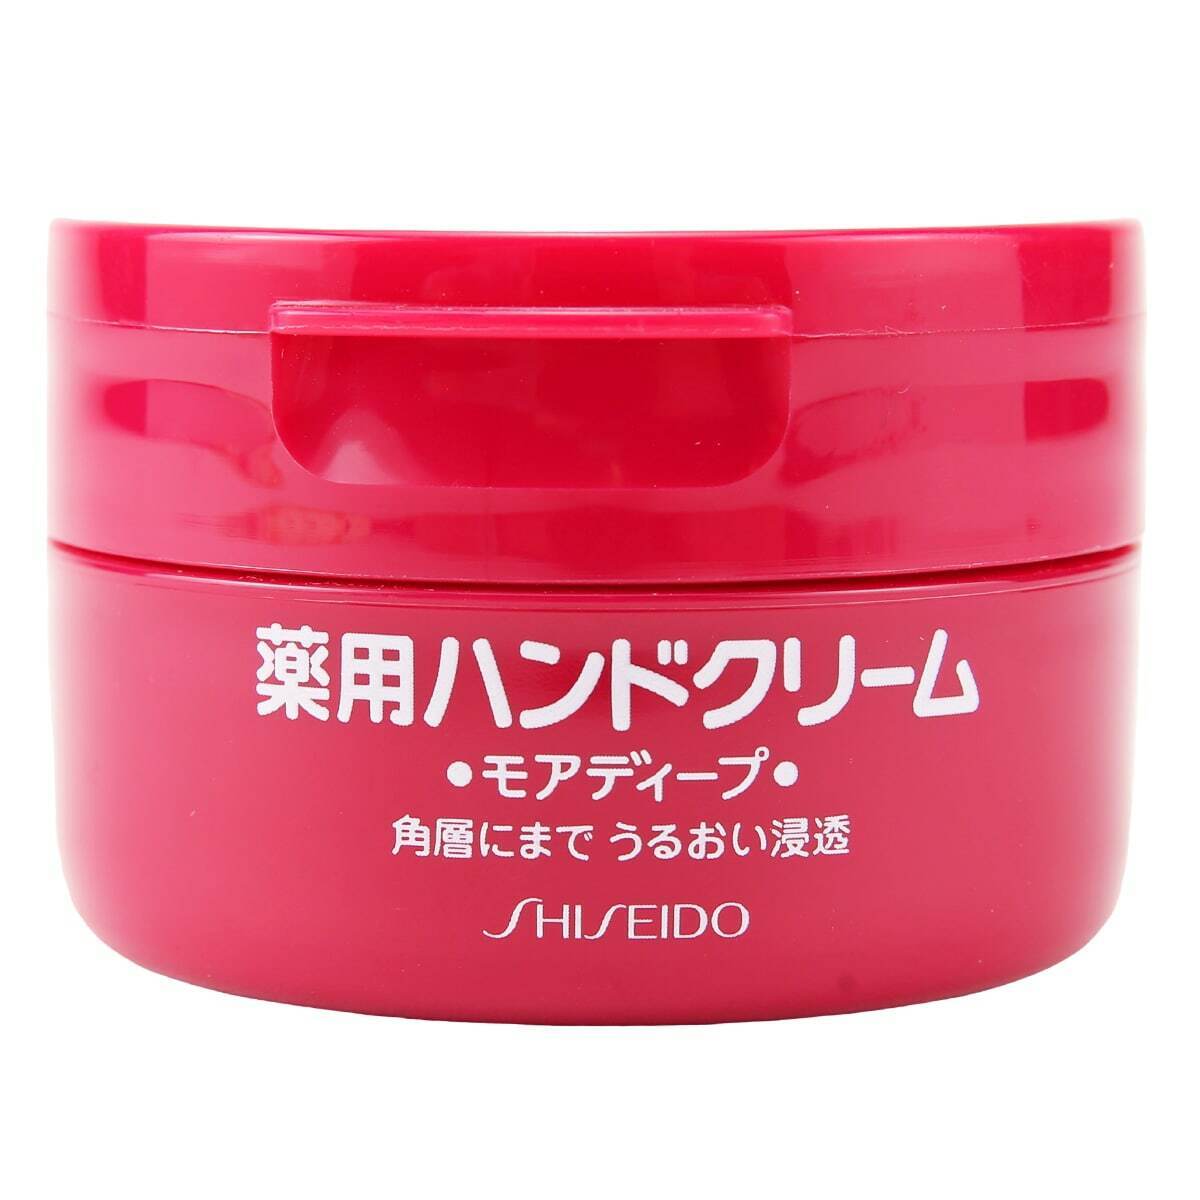 Shiseido Medicated More Deep Hand Cream Red Extra Strength All Skin 100g NEW